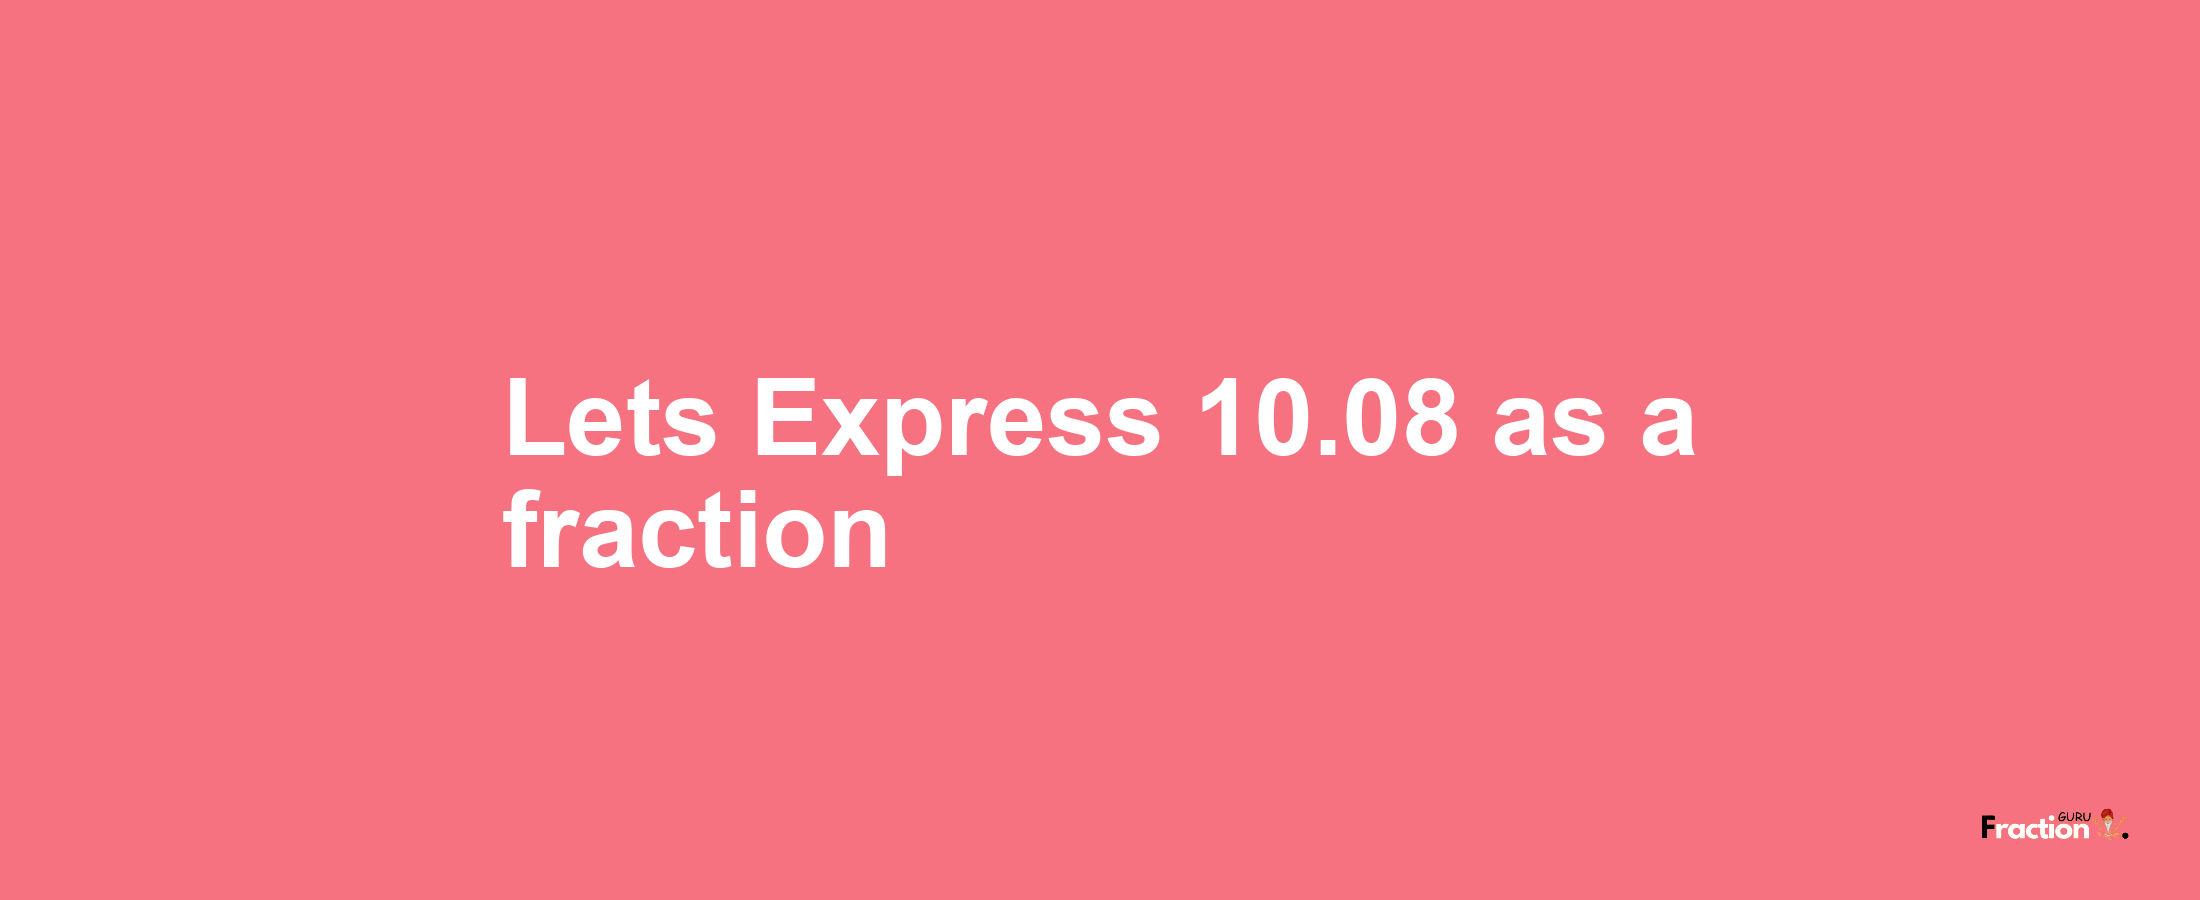 Lets Express 10.08 as afraction